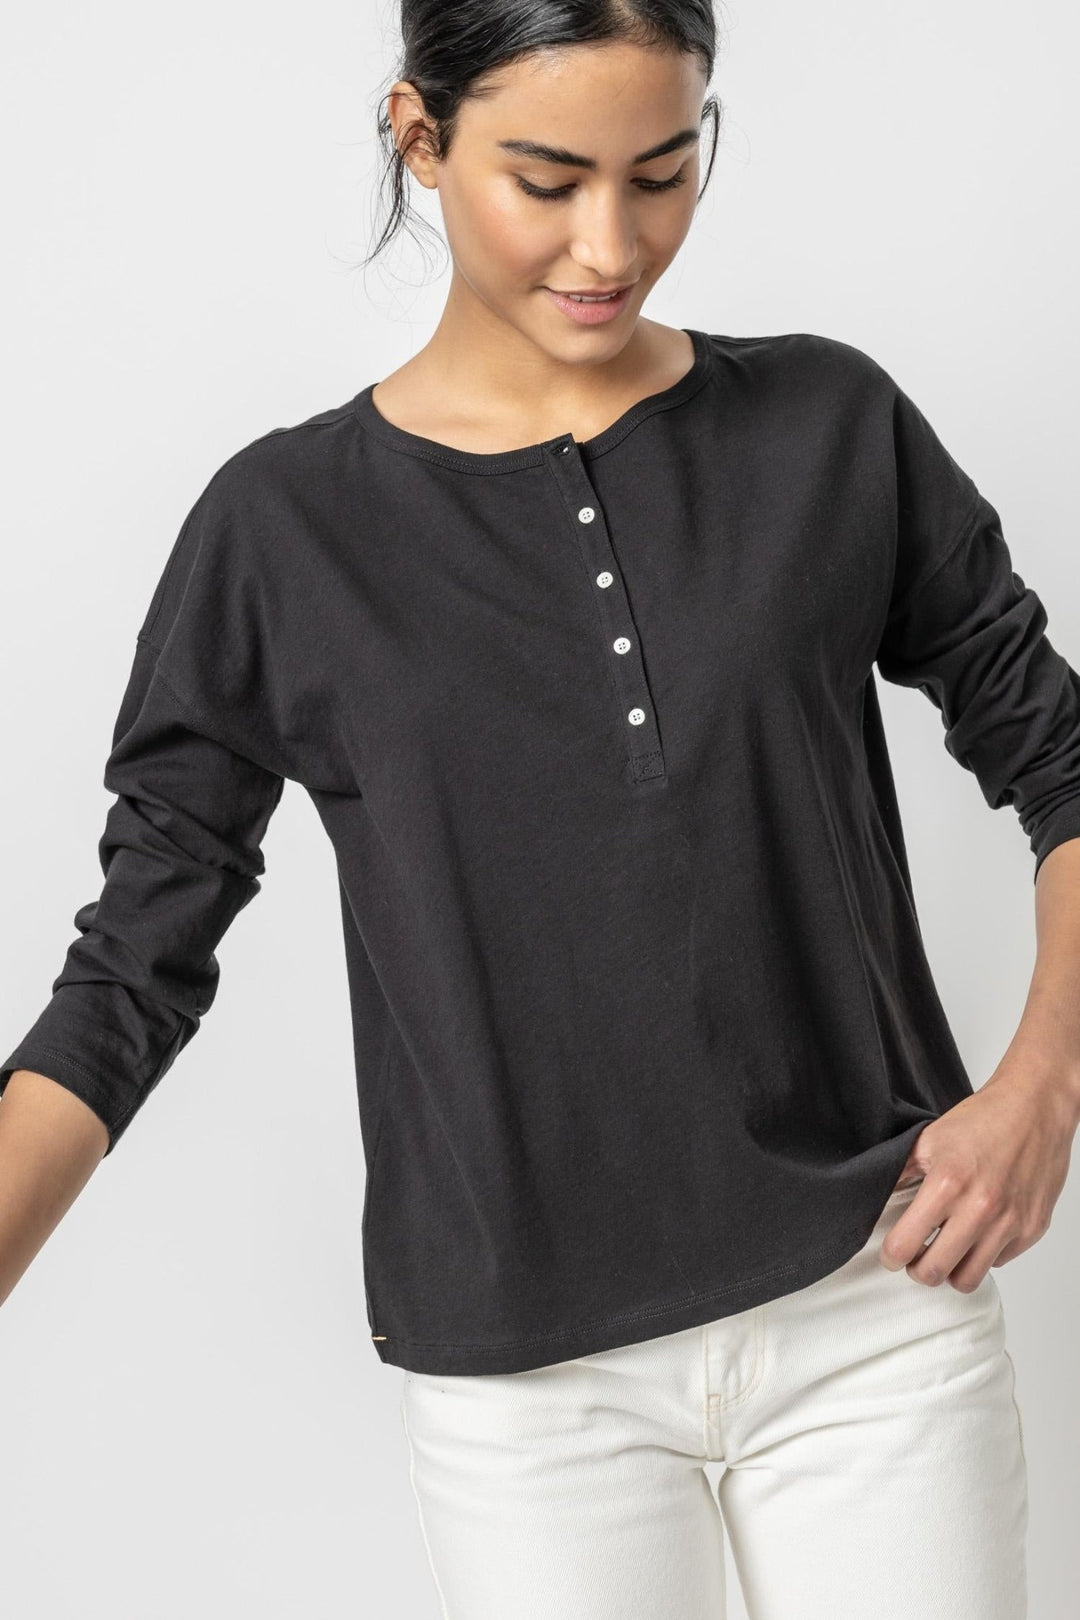 Lilla P - Relaxed Soft Wash Jersey Henley: Black - Shorely Chic Boutique